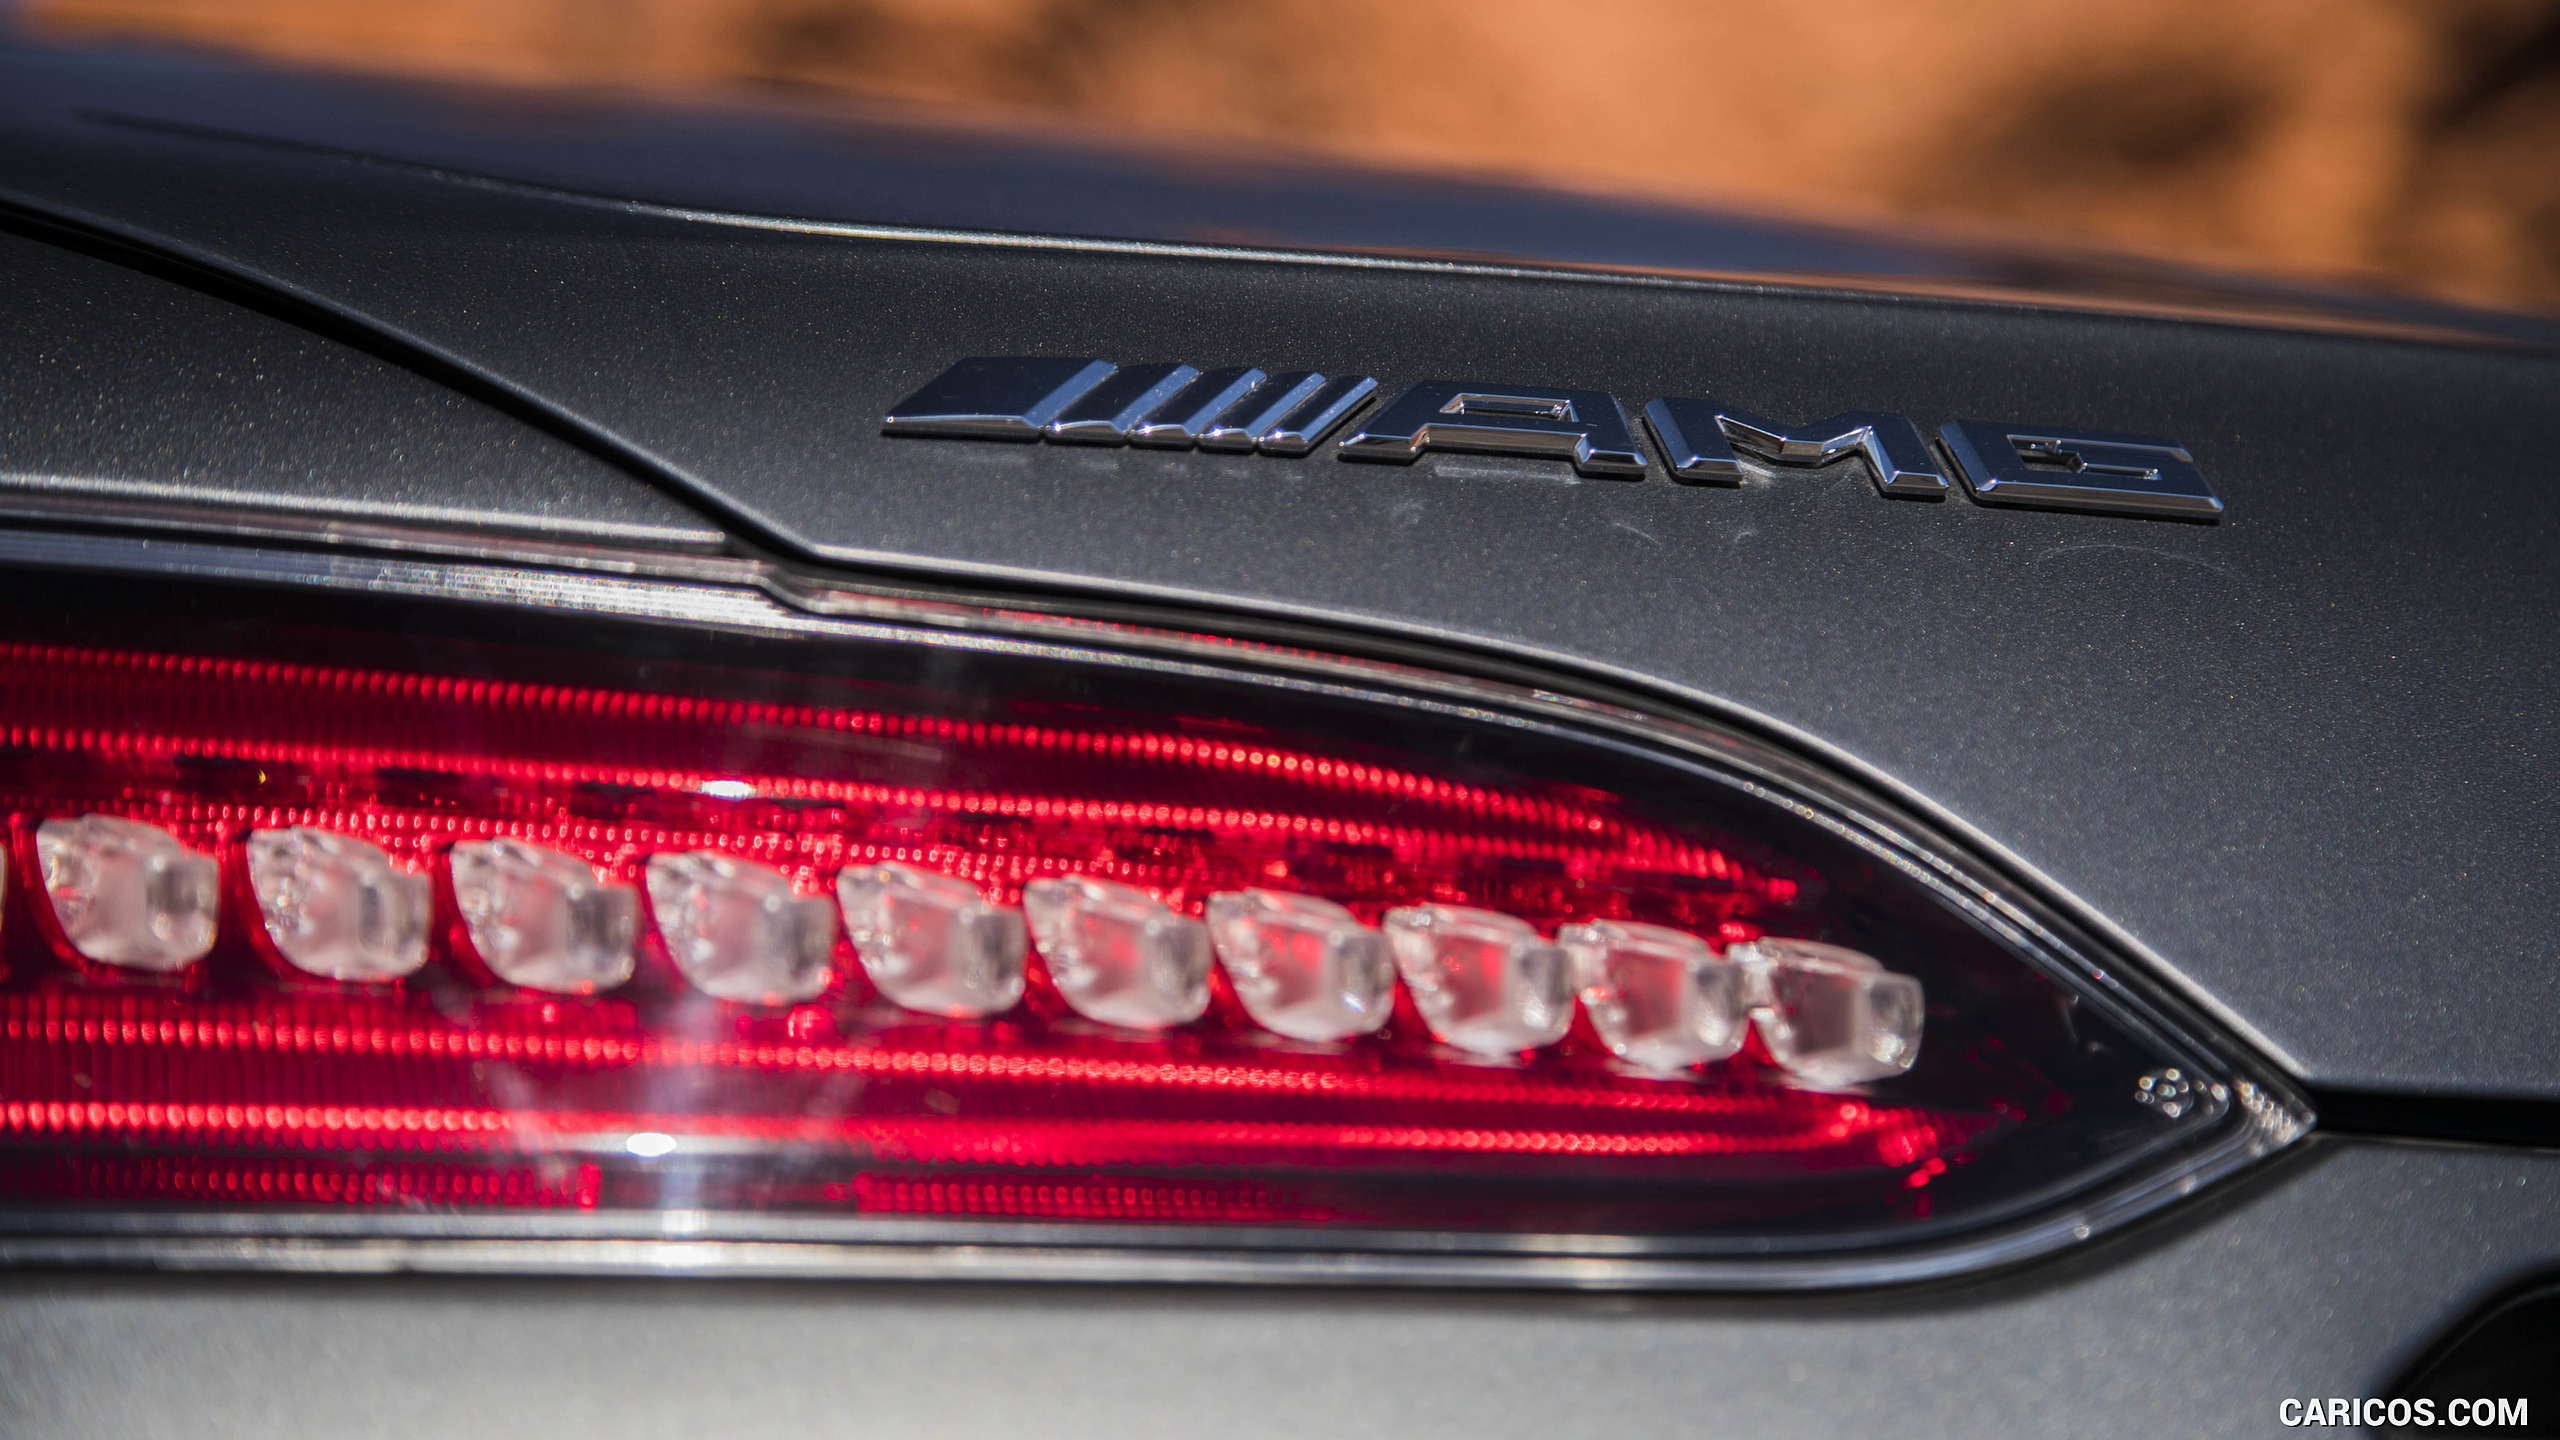 2018 Mercedes-AMG GT C Roadster - Tail Light, #69 of 350